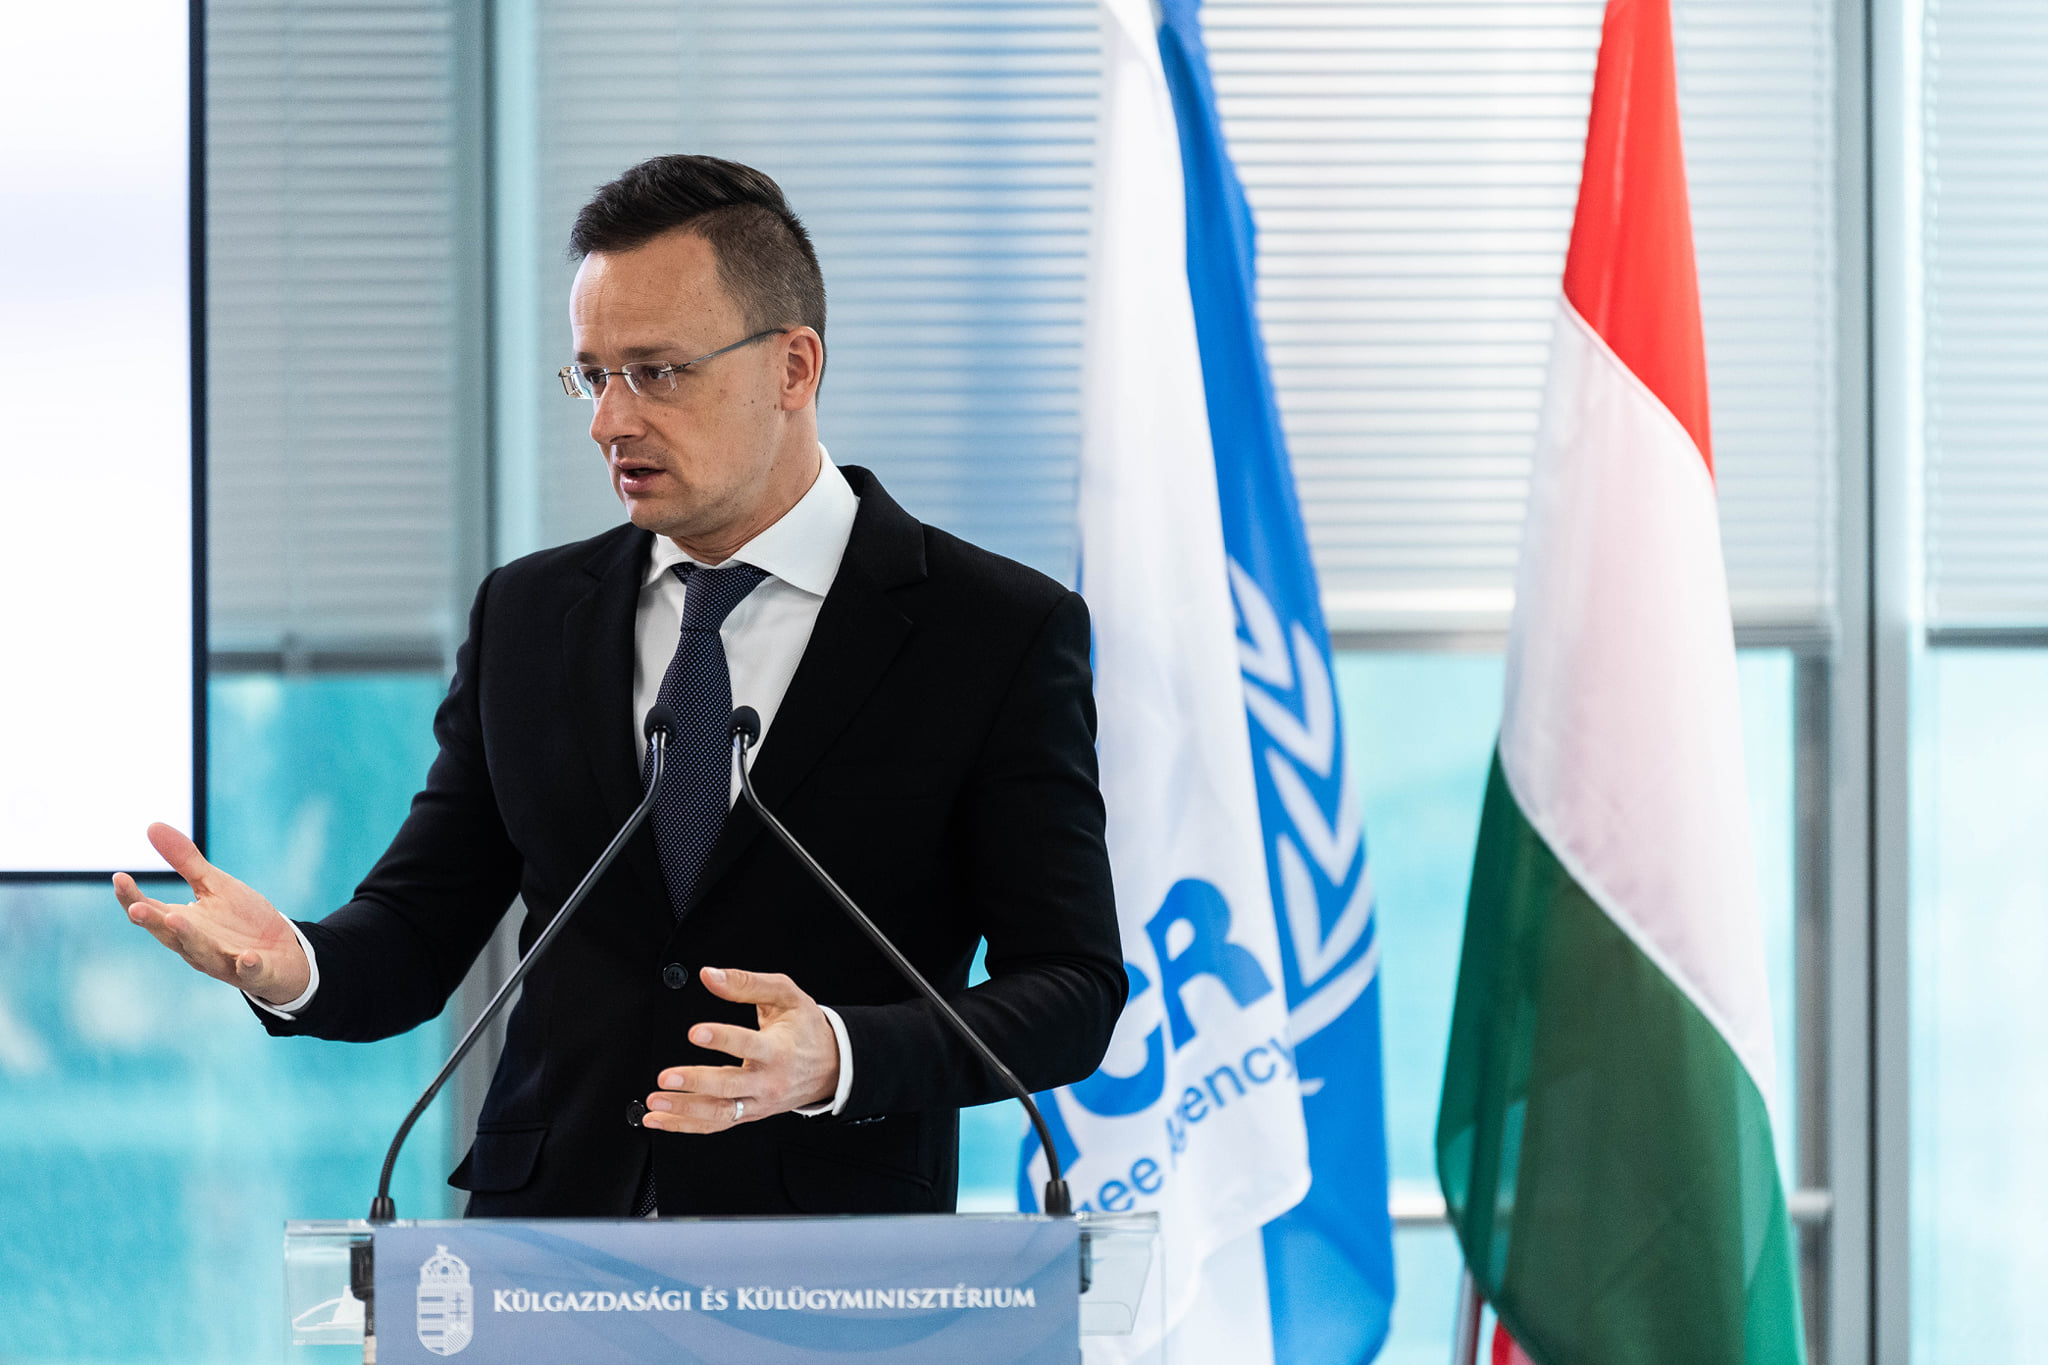 Foreign Minister Inaugurates UN’s First Regional Counter-Terrorism Centre in Budapest